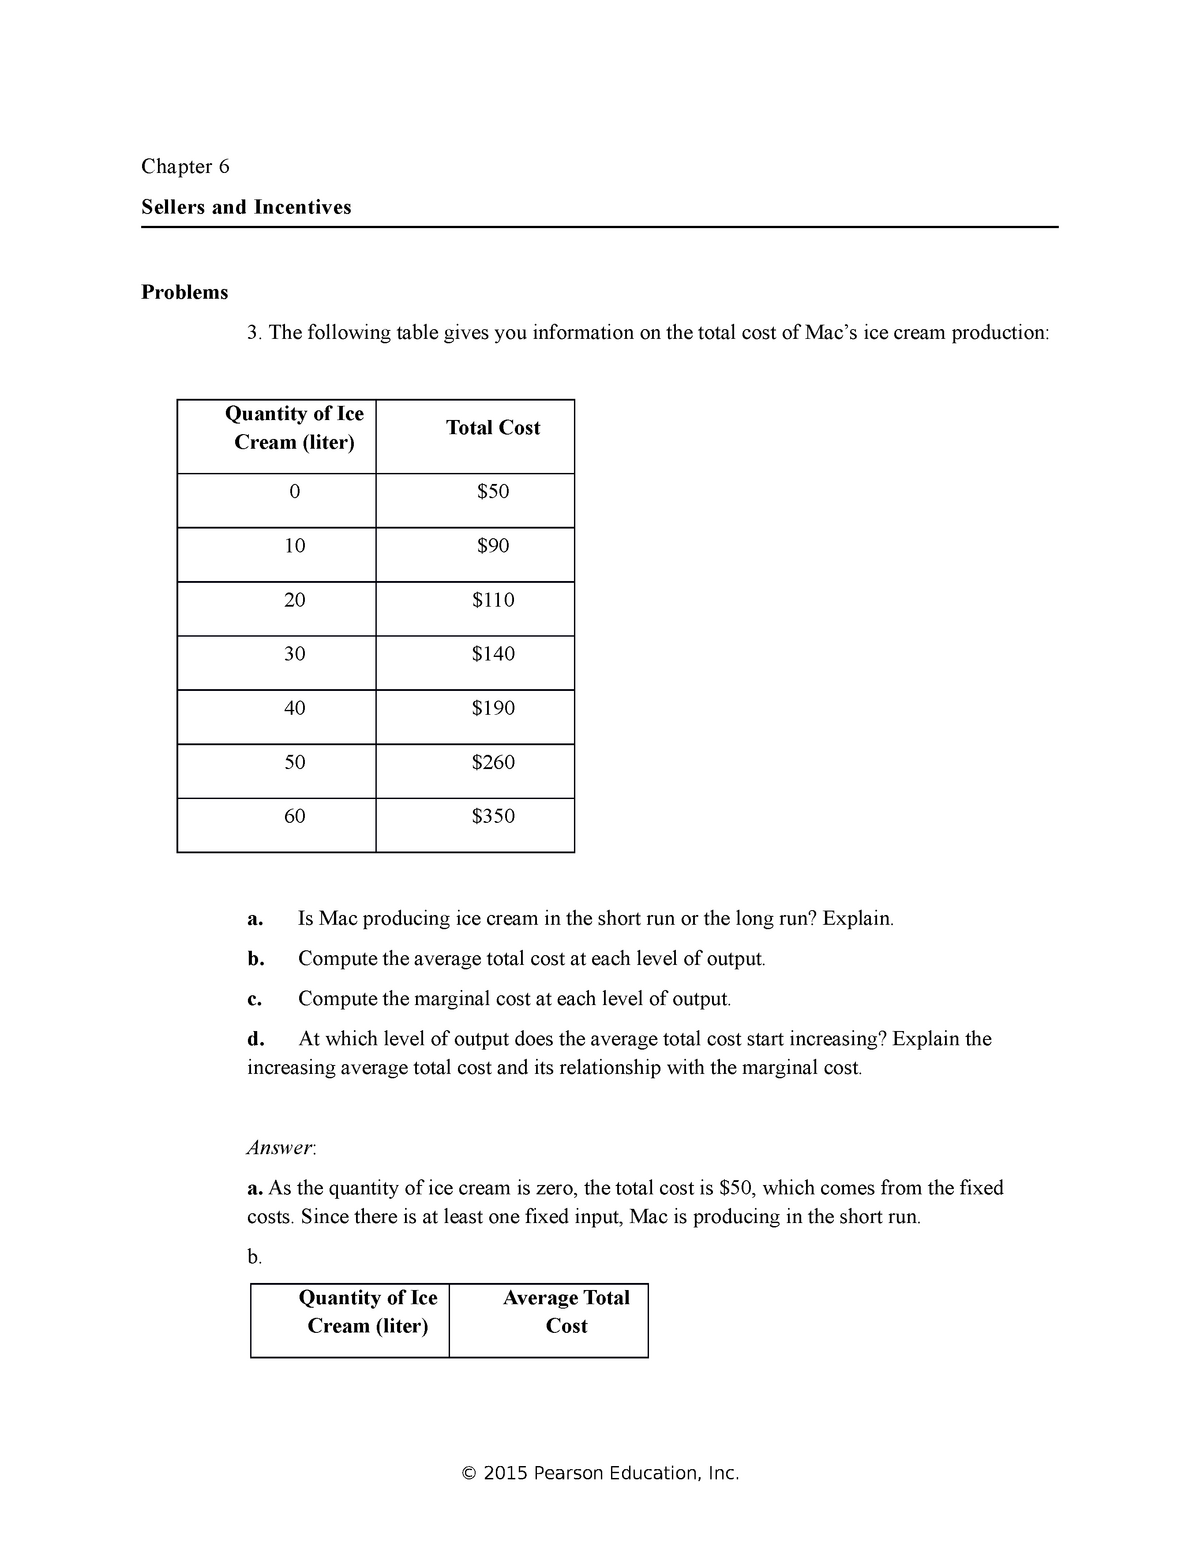 Sample/practice exam 3 April 2015, questions and answers - Chapter 6 ...